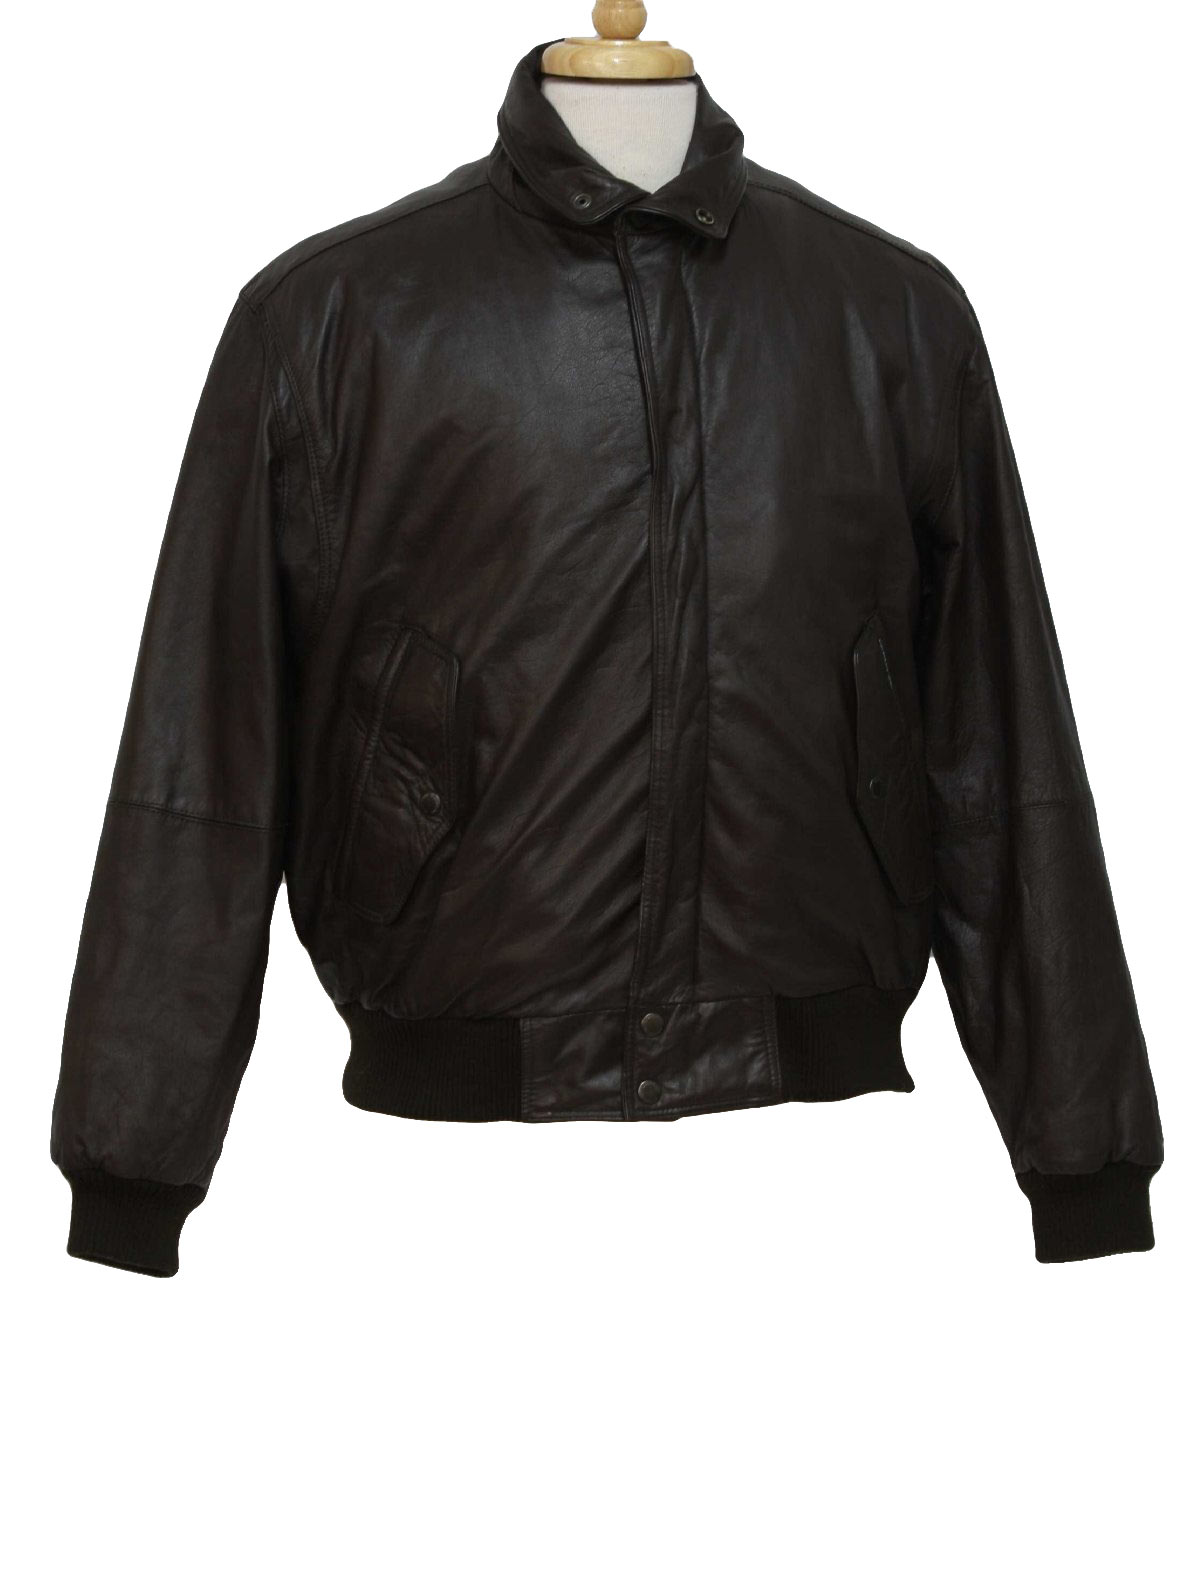 Retro 1980's Leather Jacket (Members Only) : 80s -Members Only- Mens ...